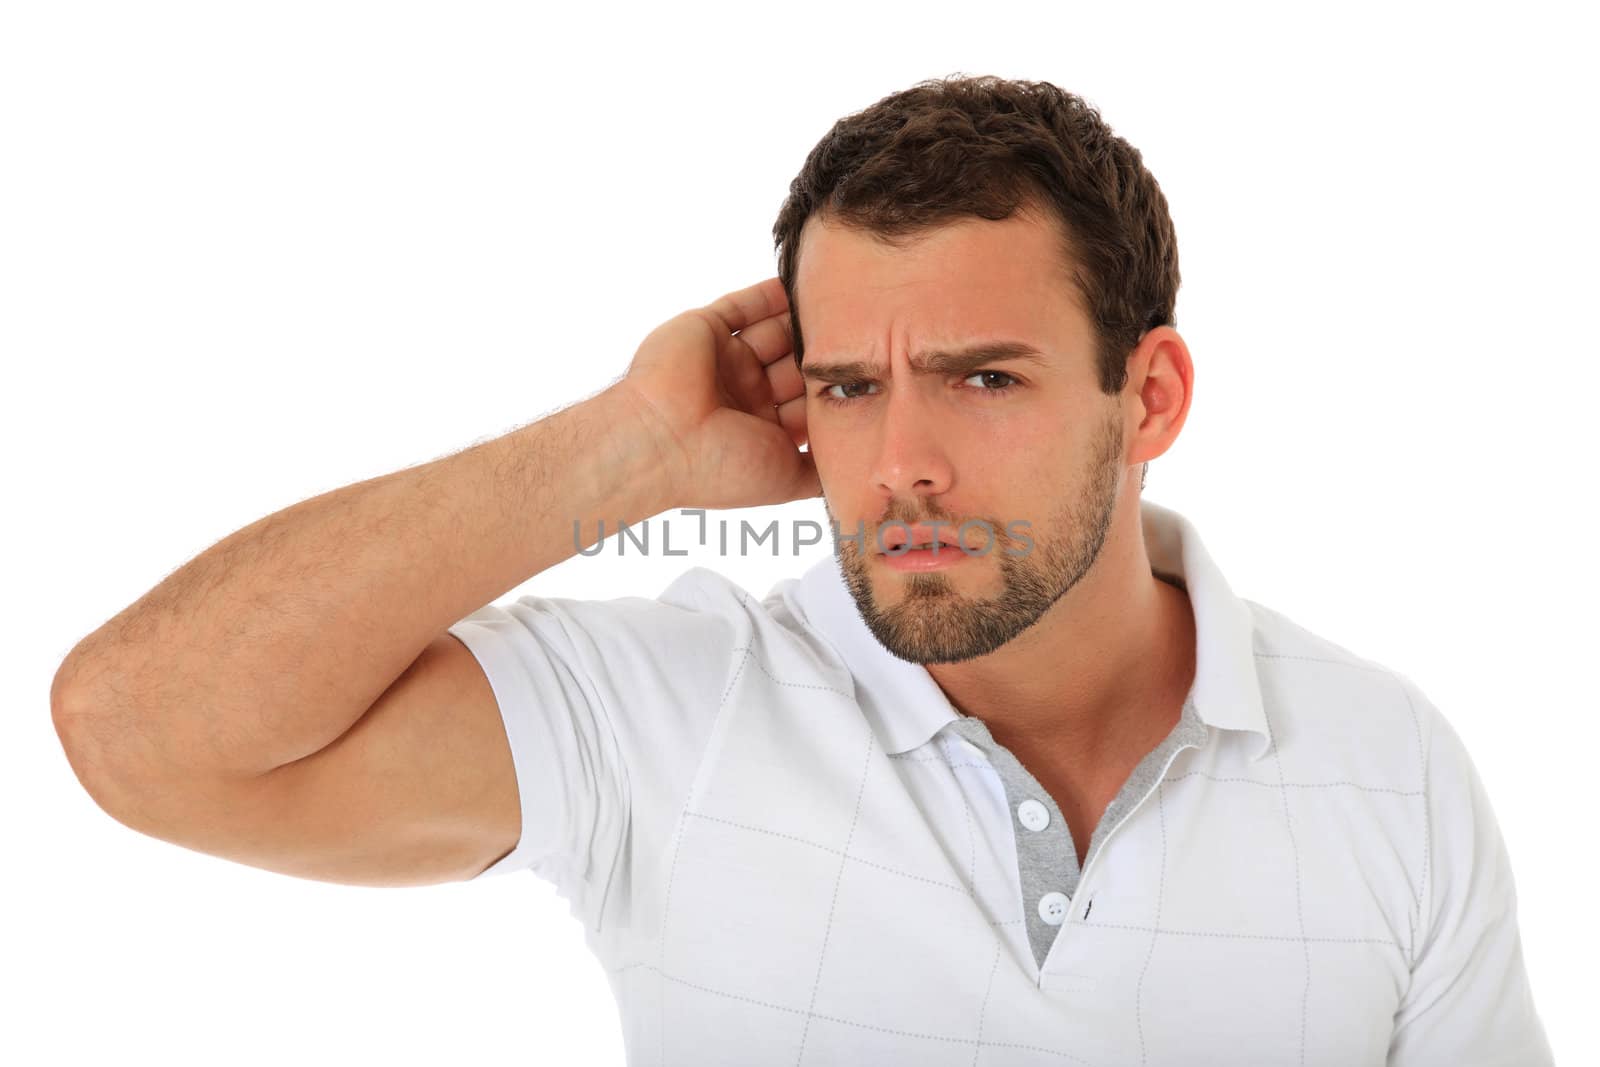 Young guy cant hear. All on white background.